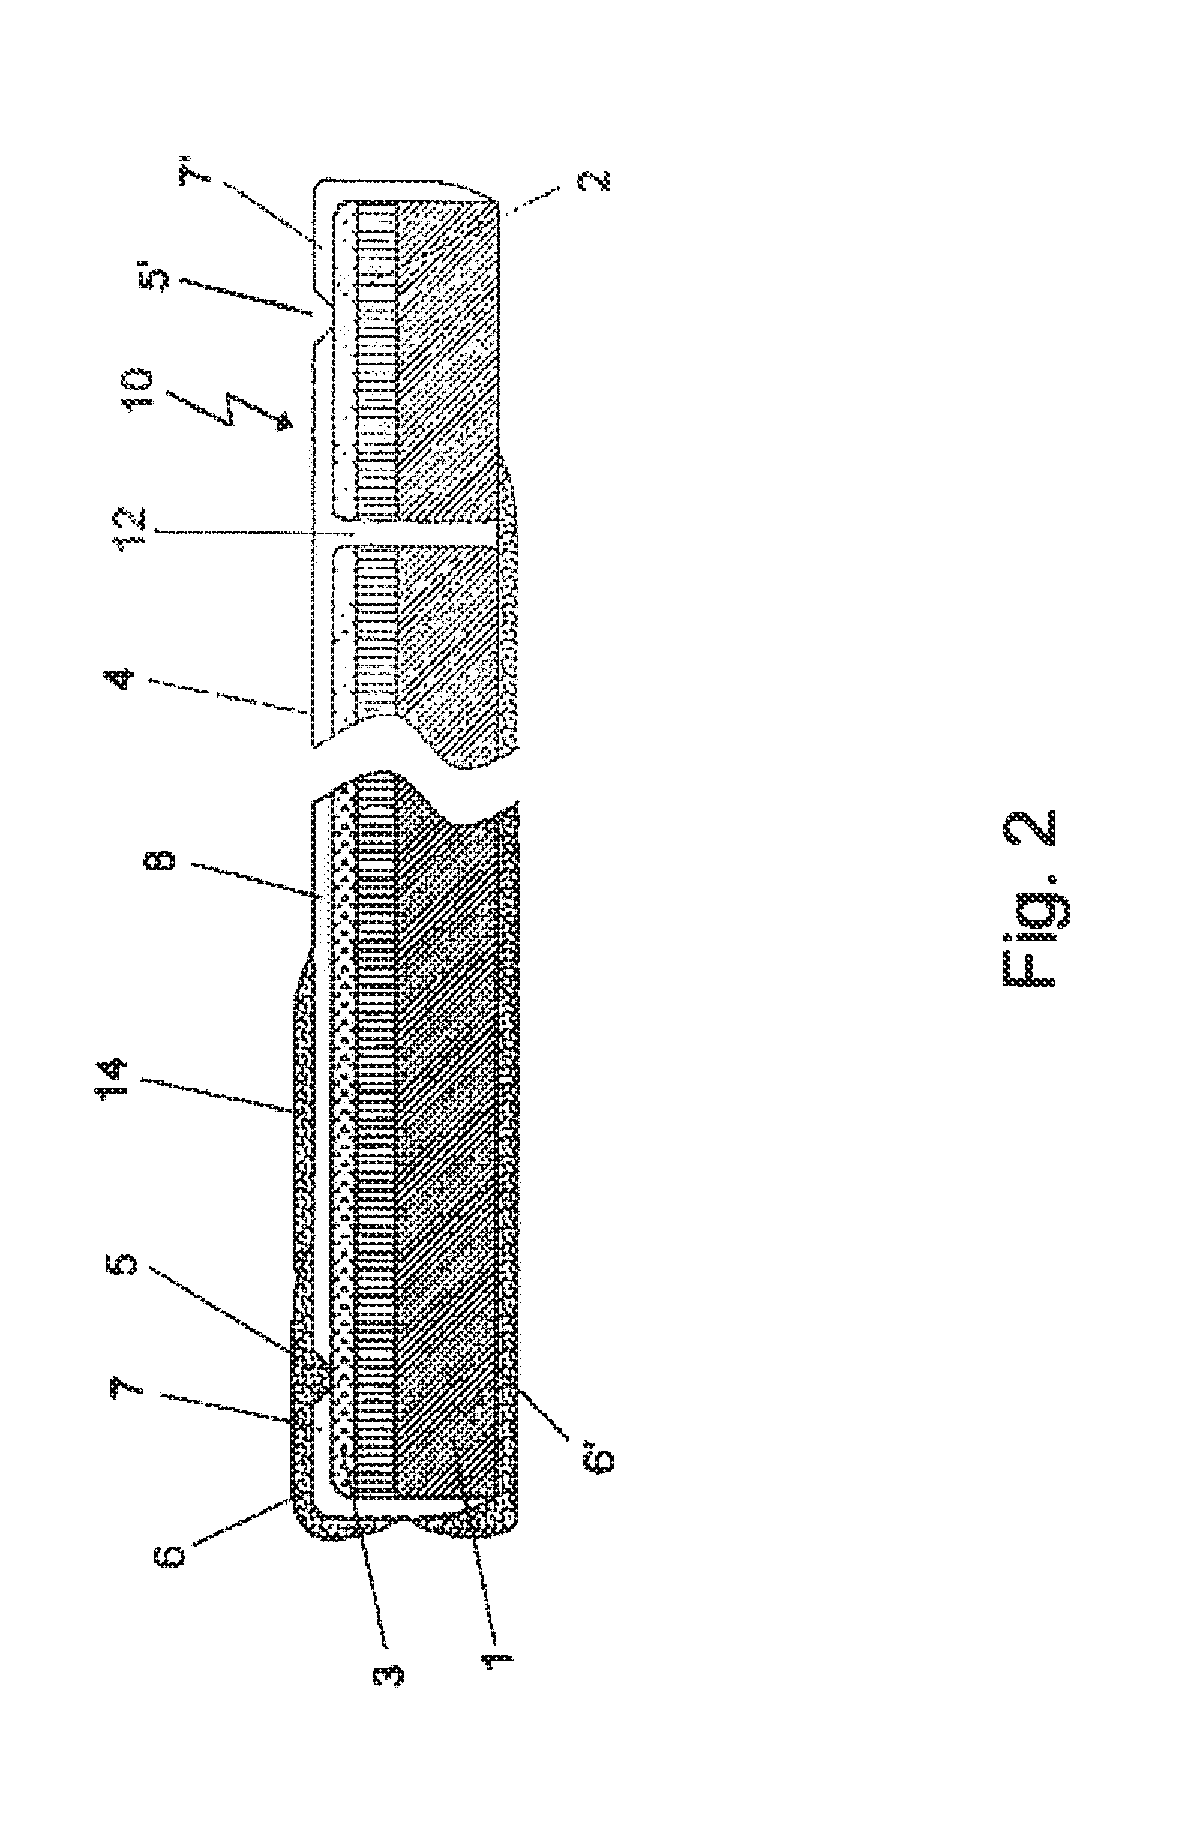 Thin film solar cell and photovoltaic string assembly